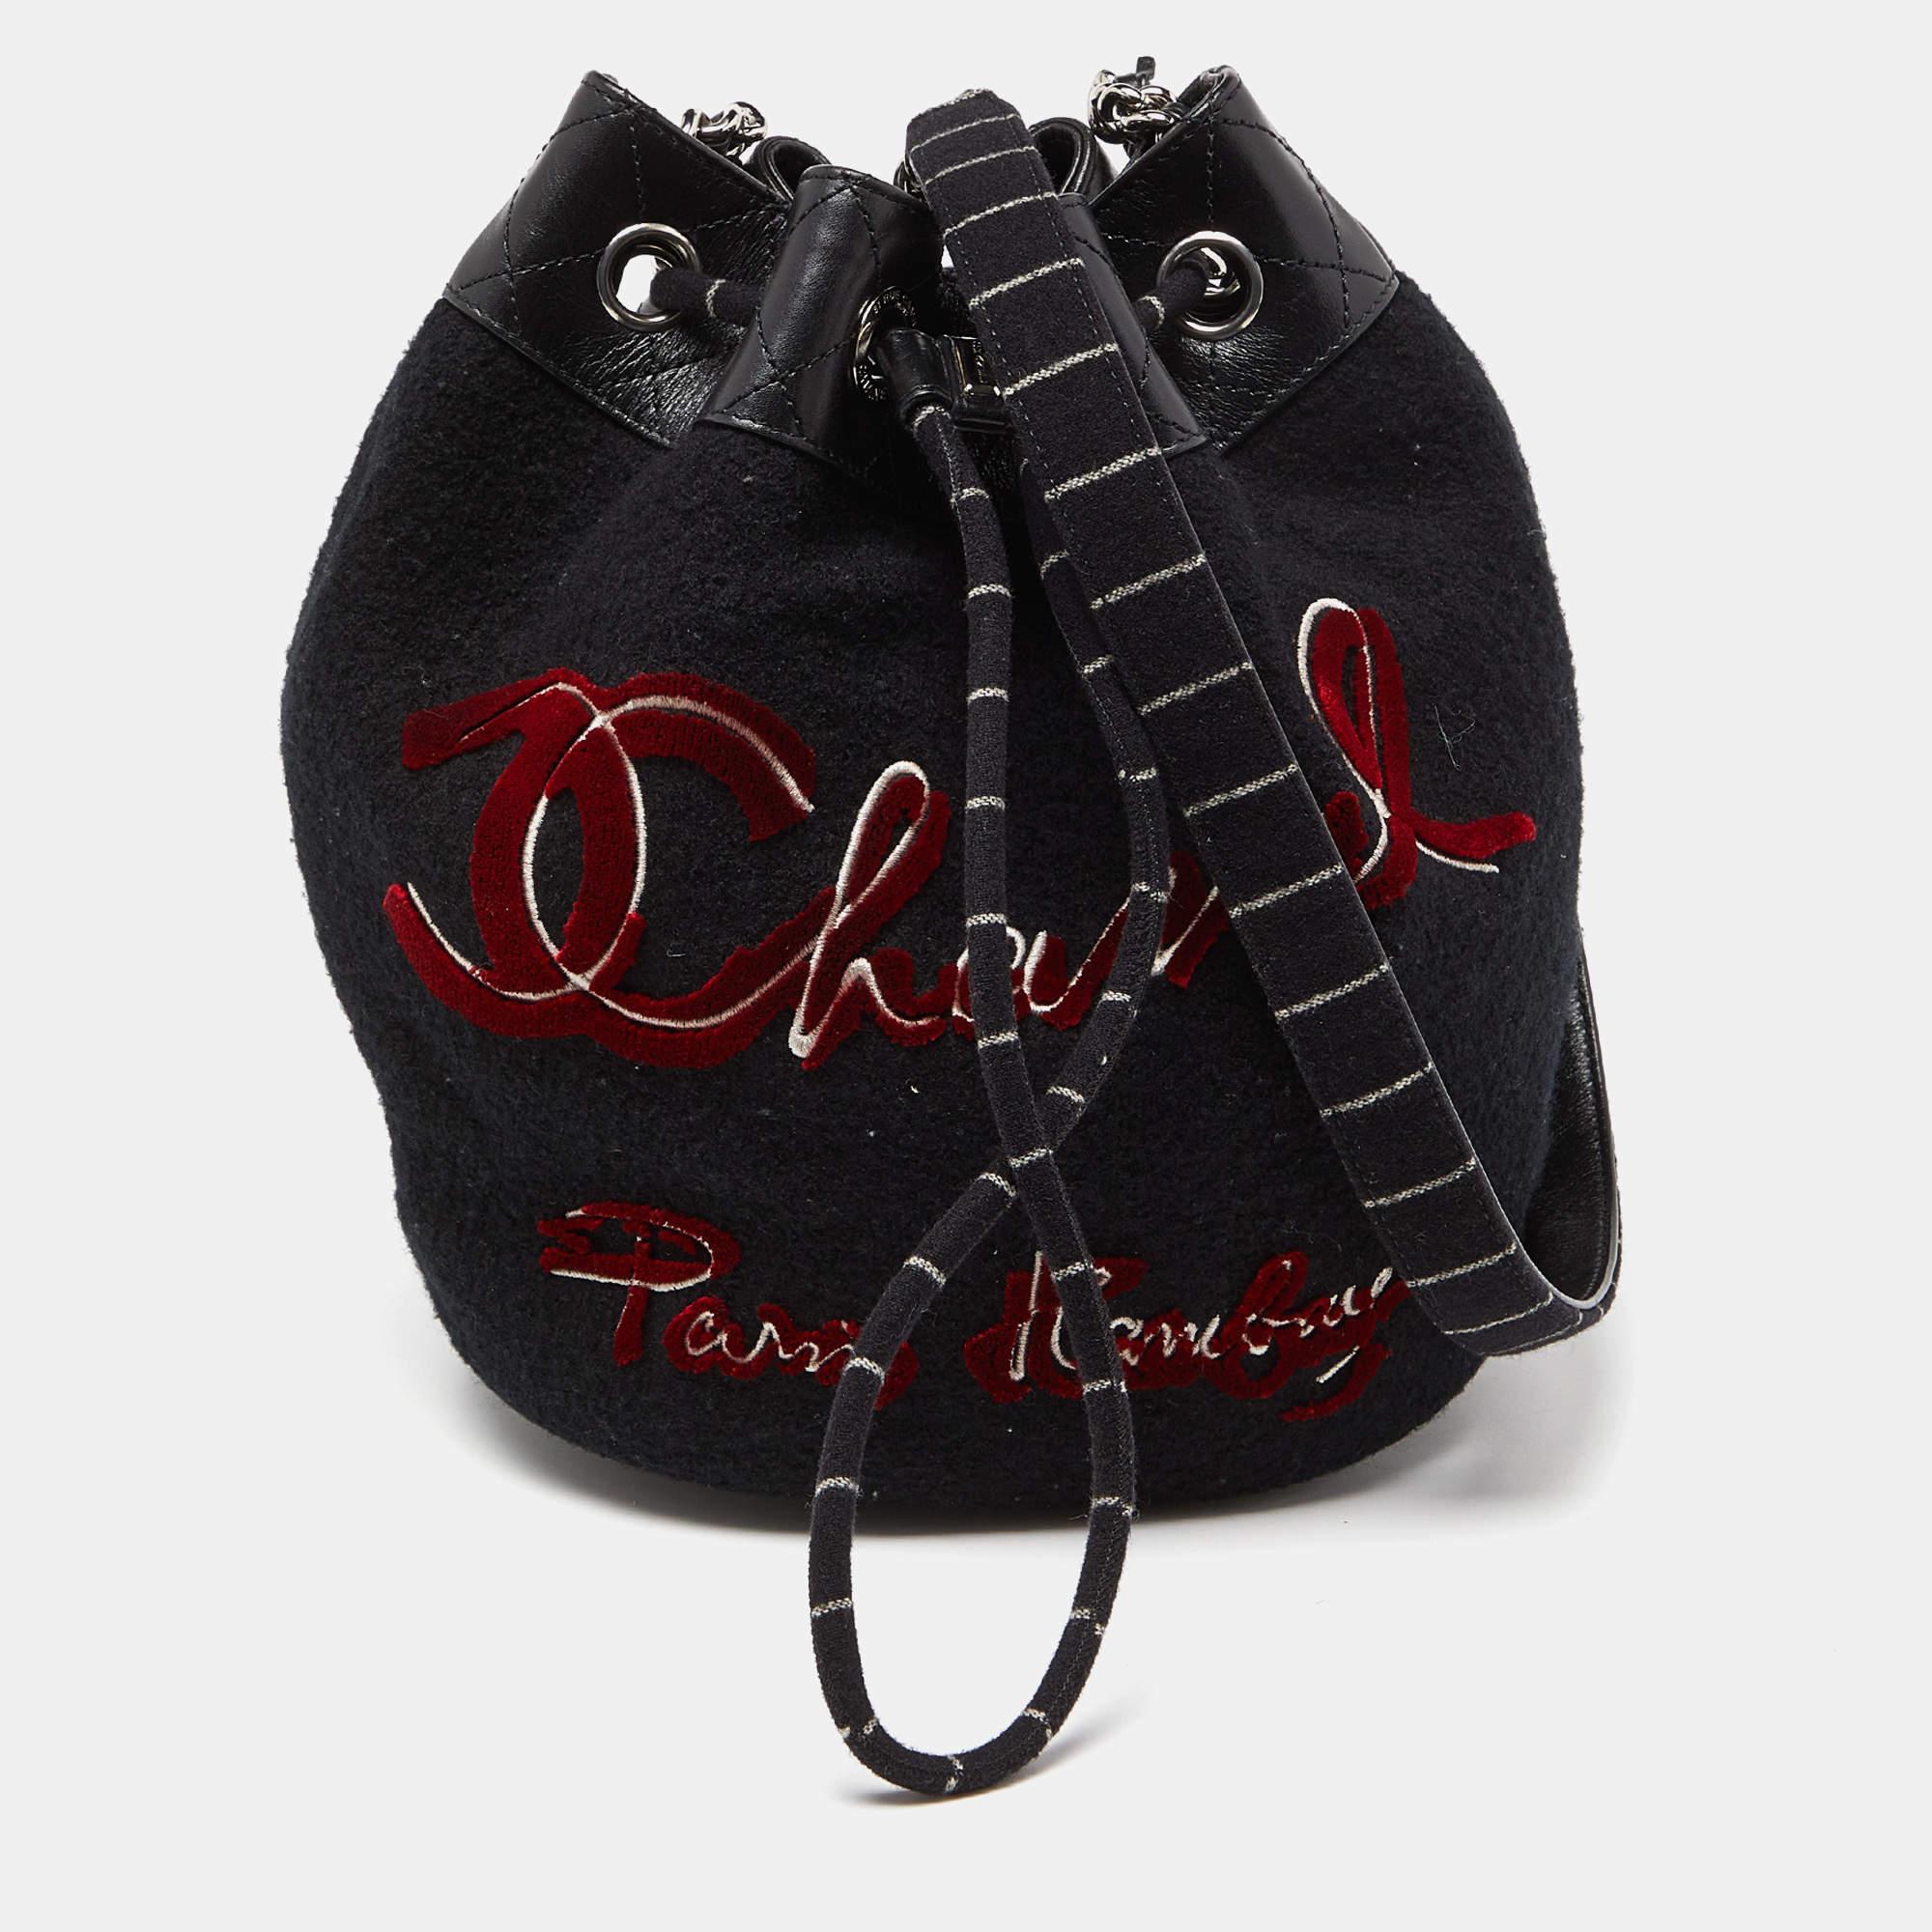 Indulge in luxury with this Chanel drawstring bag. Meticulously crafted from premium materials, it combines exquisite design, impeccable craftsmanship, and timeless elegance. Elevate your style with this fashion accessory.

